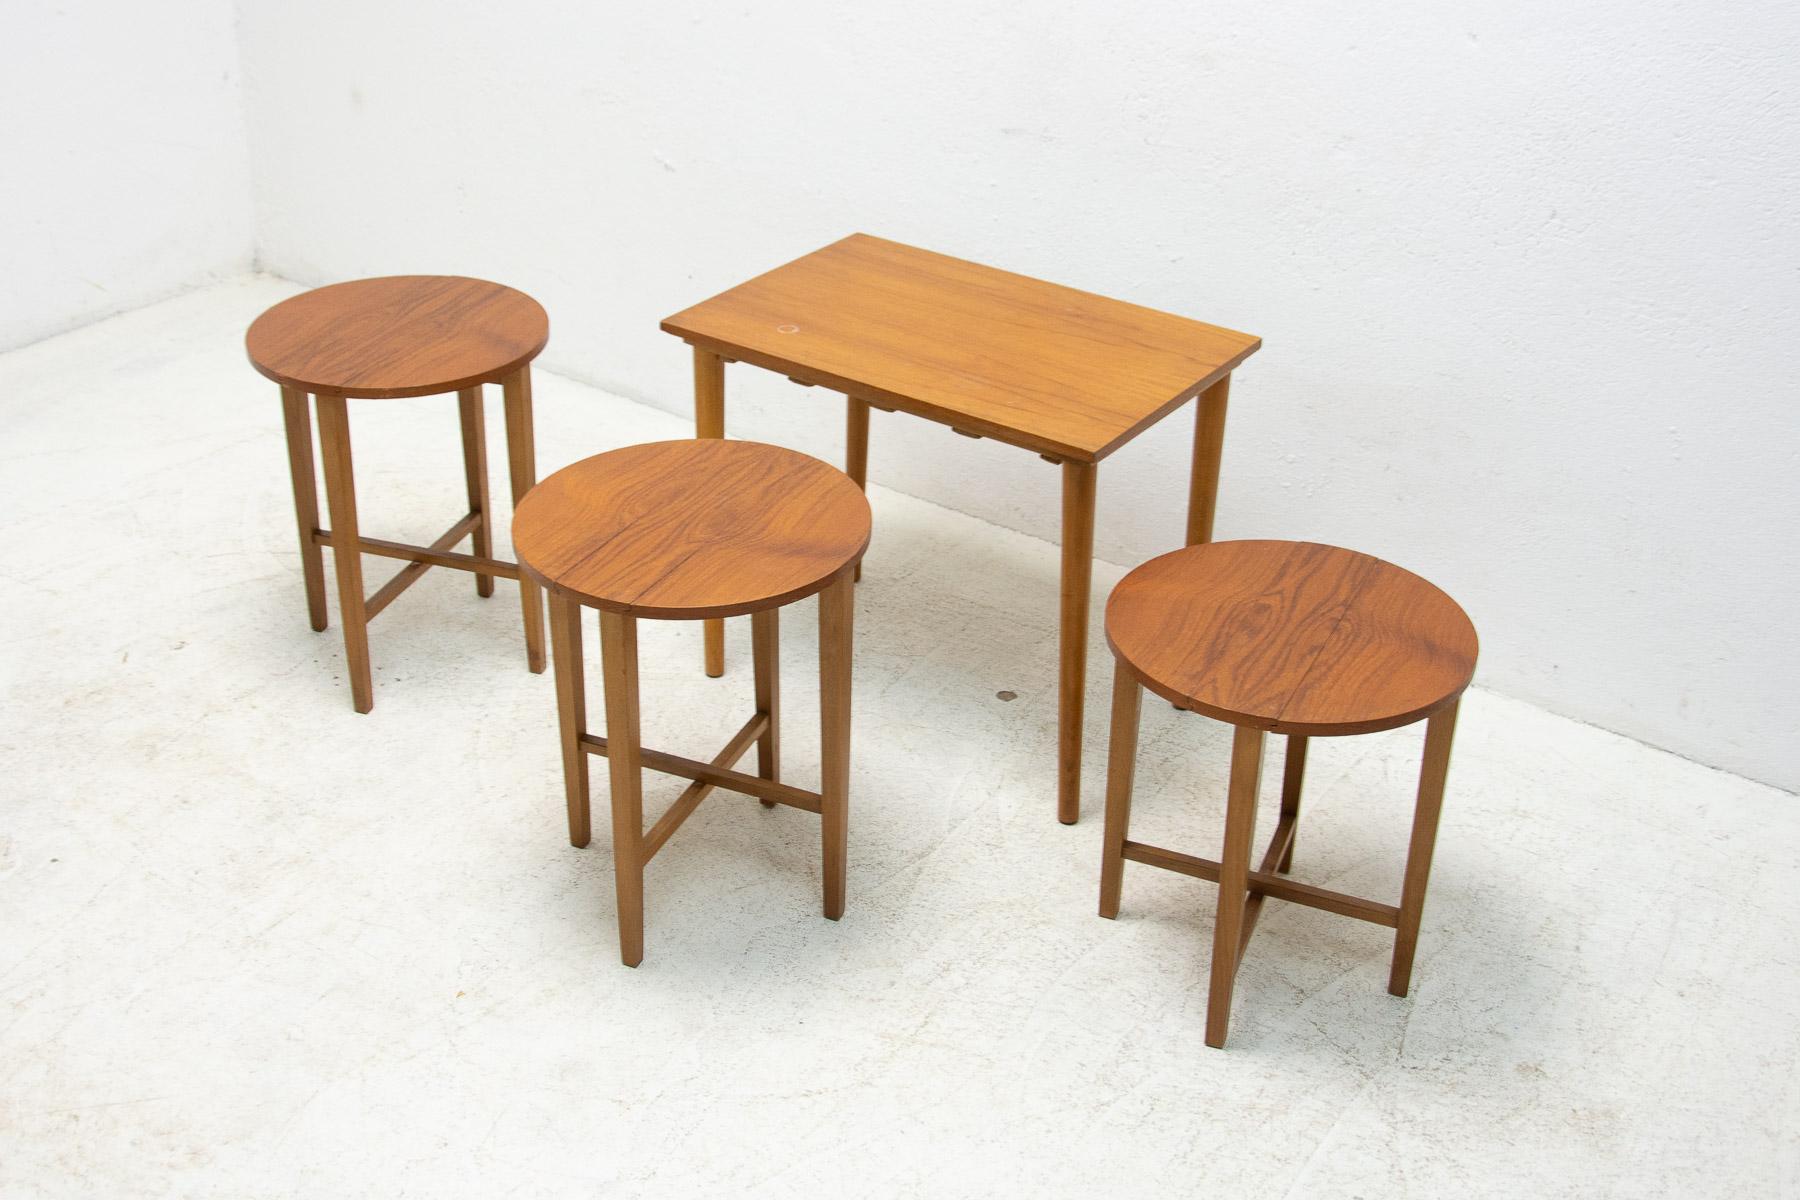 A famous set of four nesting tables designed by Poul Hundevad in the 1960´s, made by Novy Domov in the 1970's.

It's made of beech wood, in very good Vintage condition.

Dimensions of the stools:

height: 48 cm

width: 38 cm

depth: 38